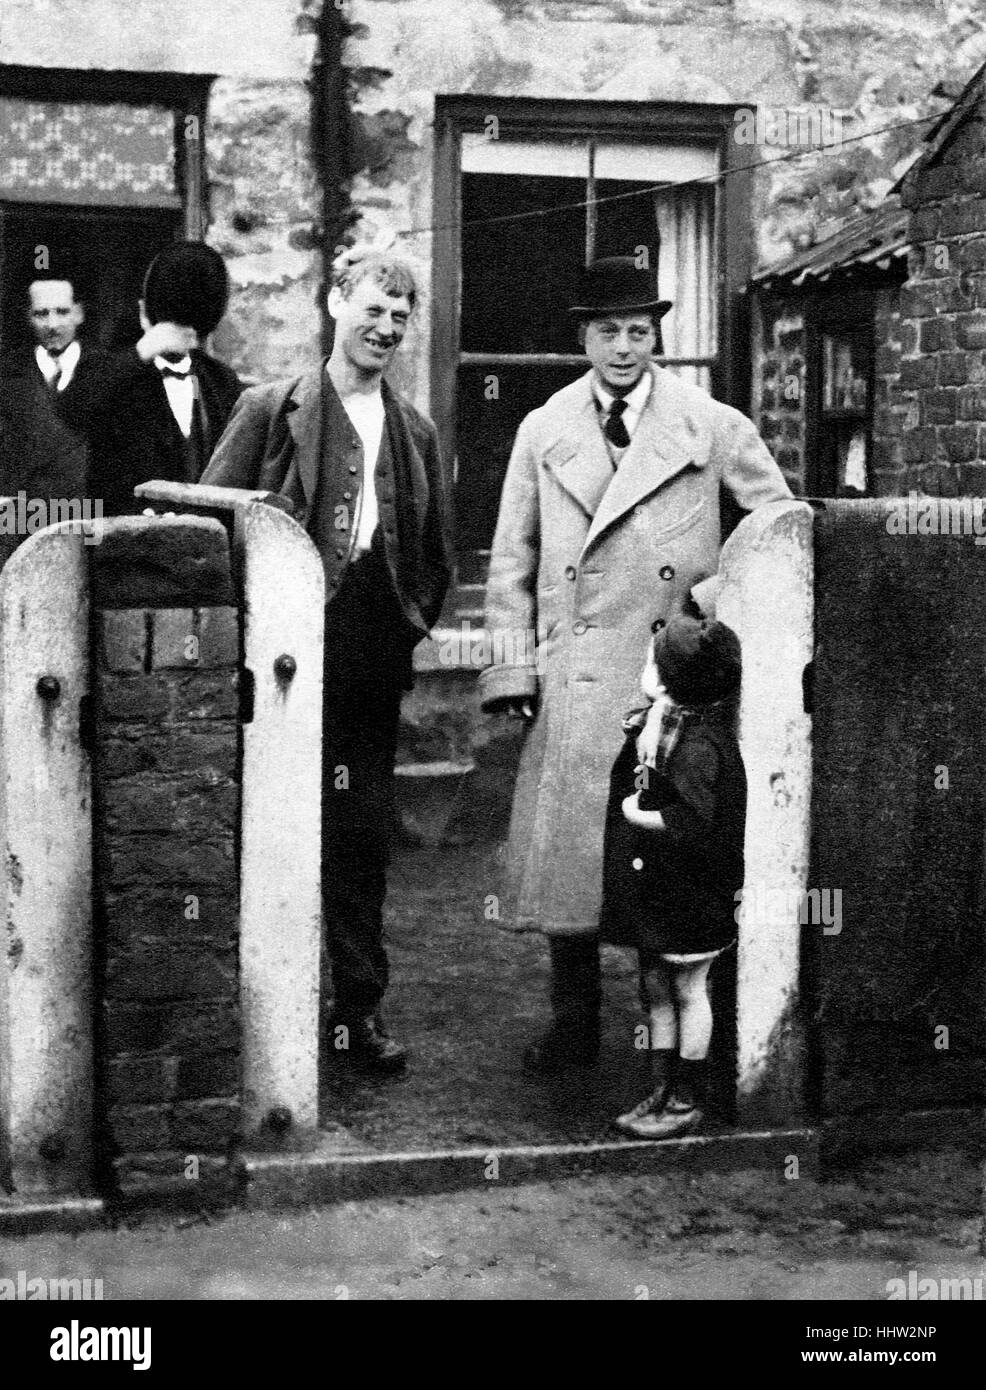 Prince of Wales (later Edward VIII) in Durham, visiting the house of a miner on a tour of mining towns to gain experience of the conditions of the coal industry, 1929. Stock Photo